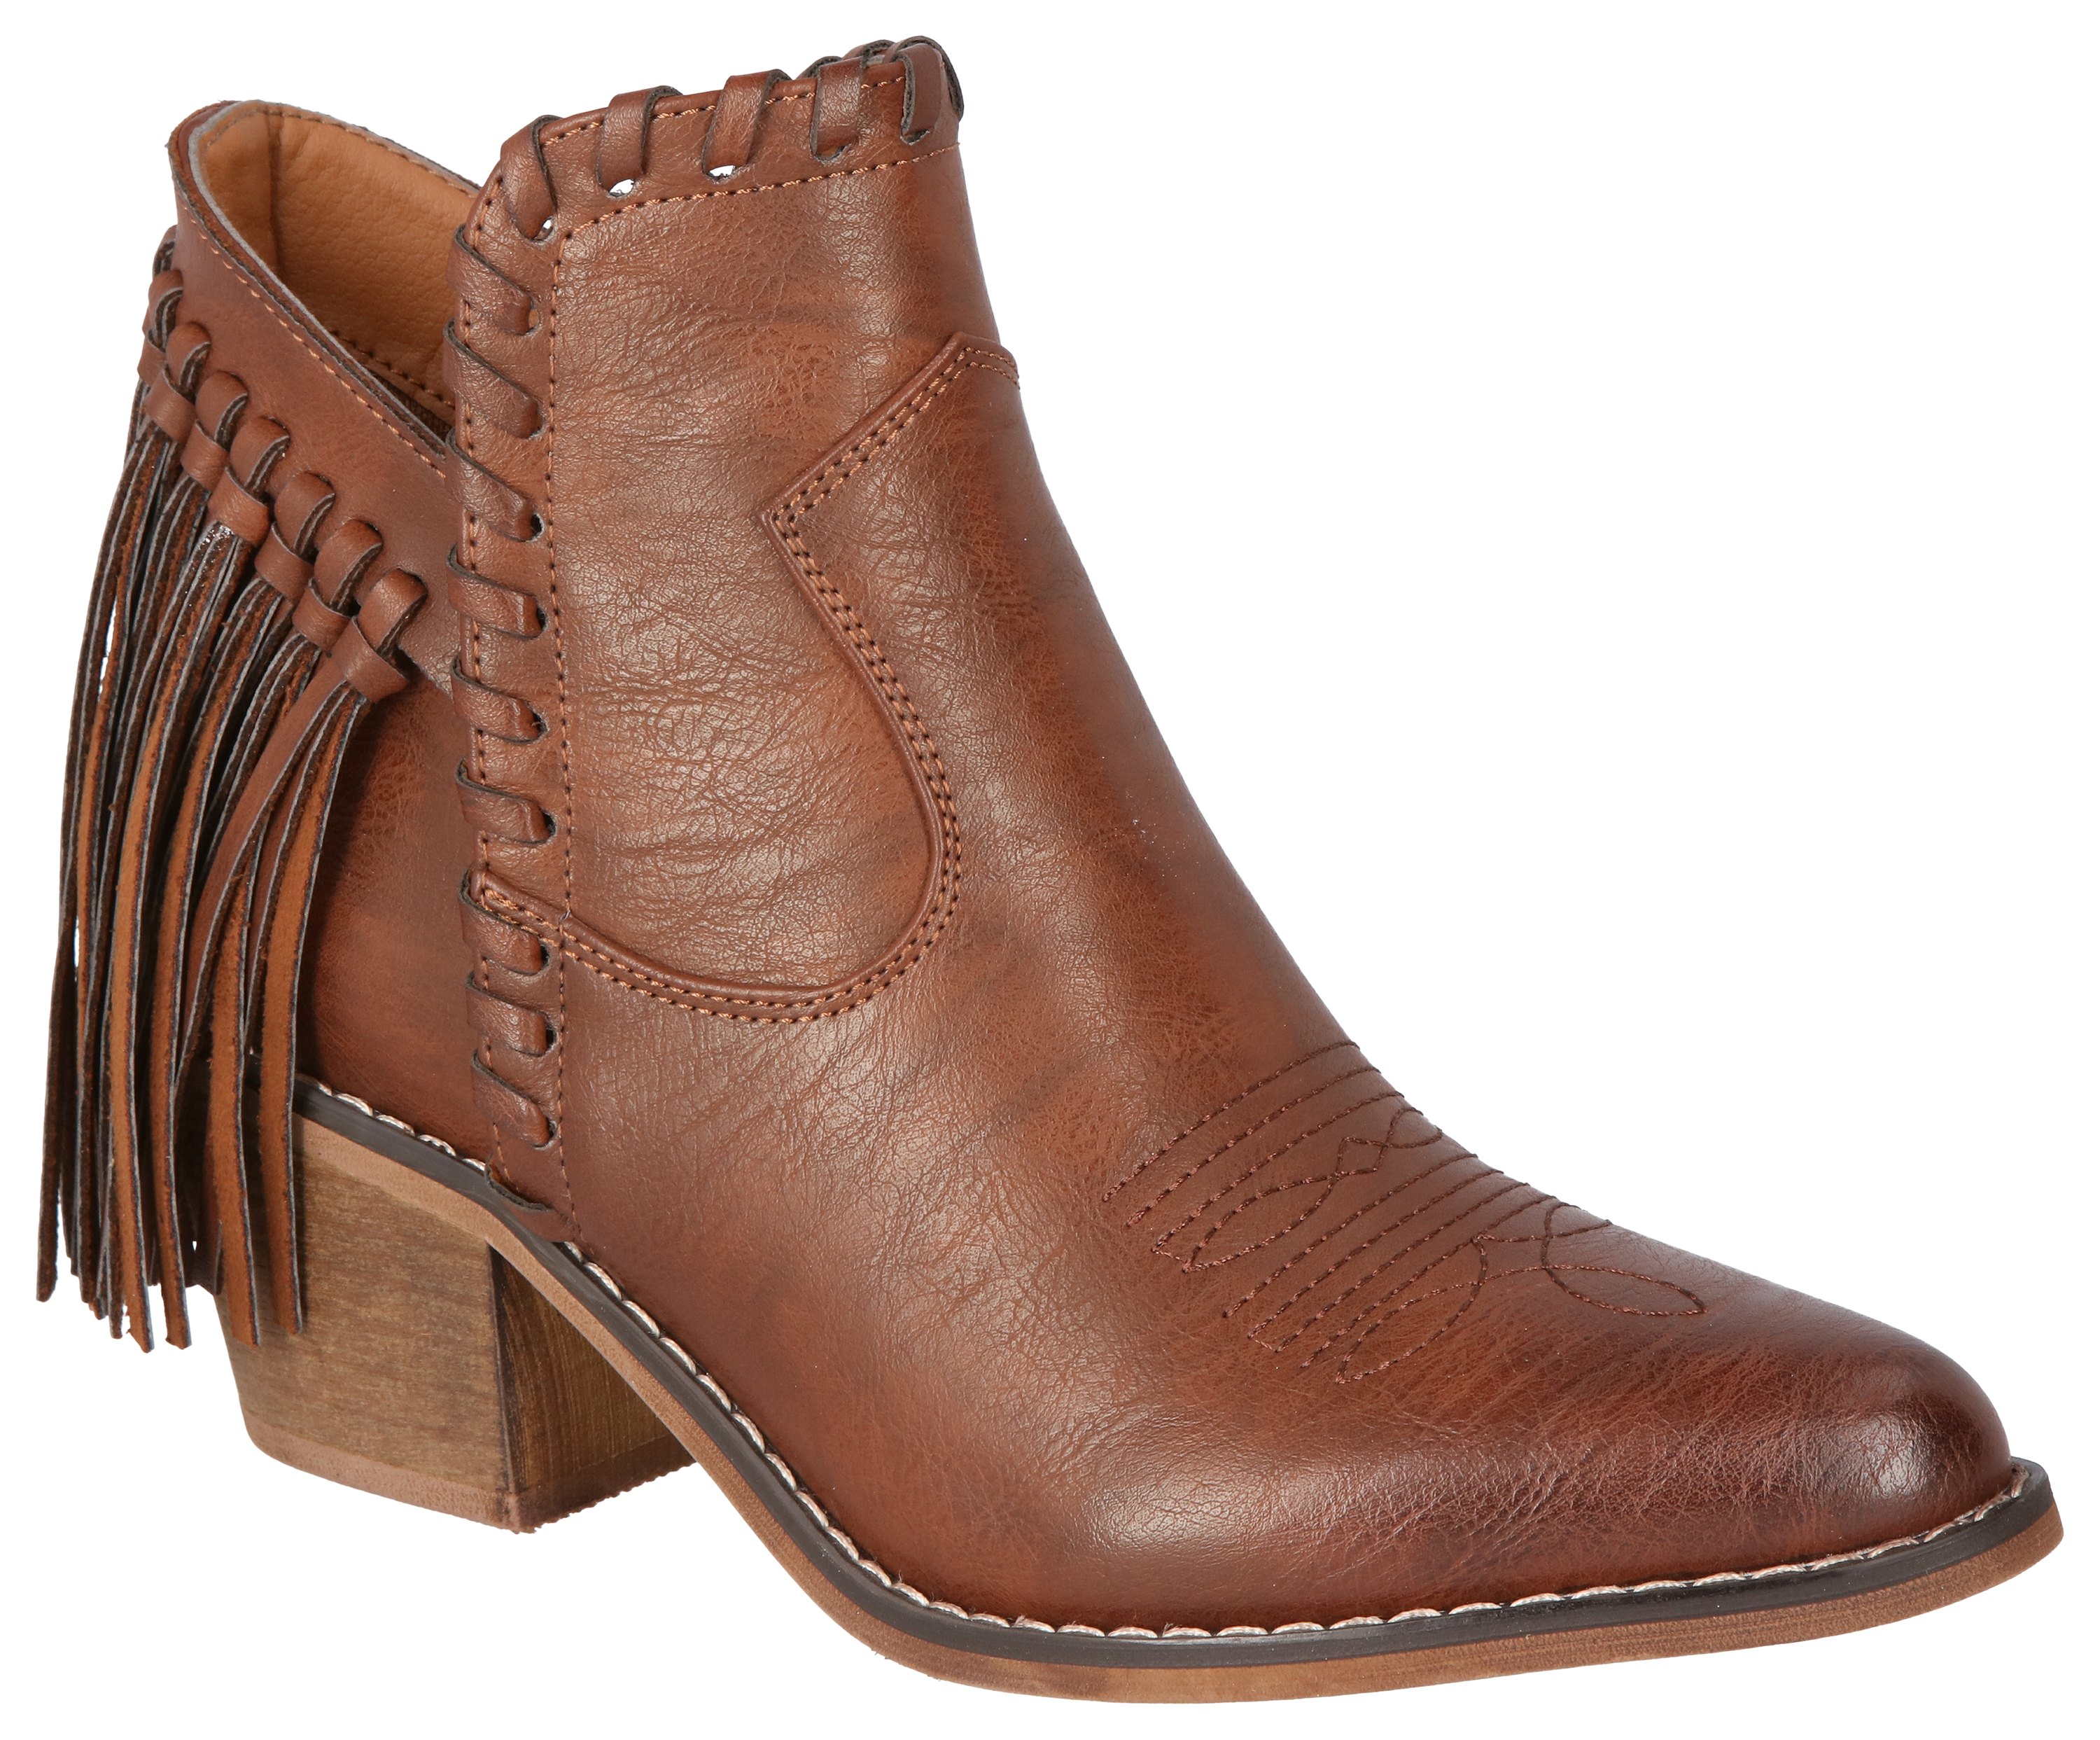 Natural Reflections Keykee Tassel Boots for Ladies - Whiskey - 9M